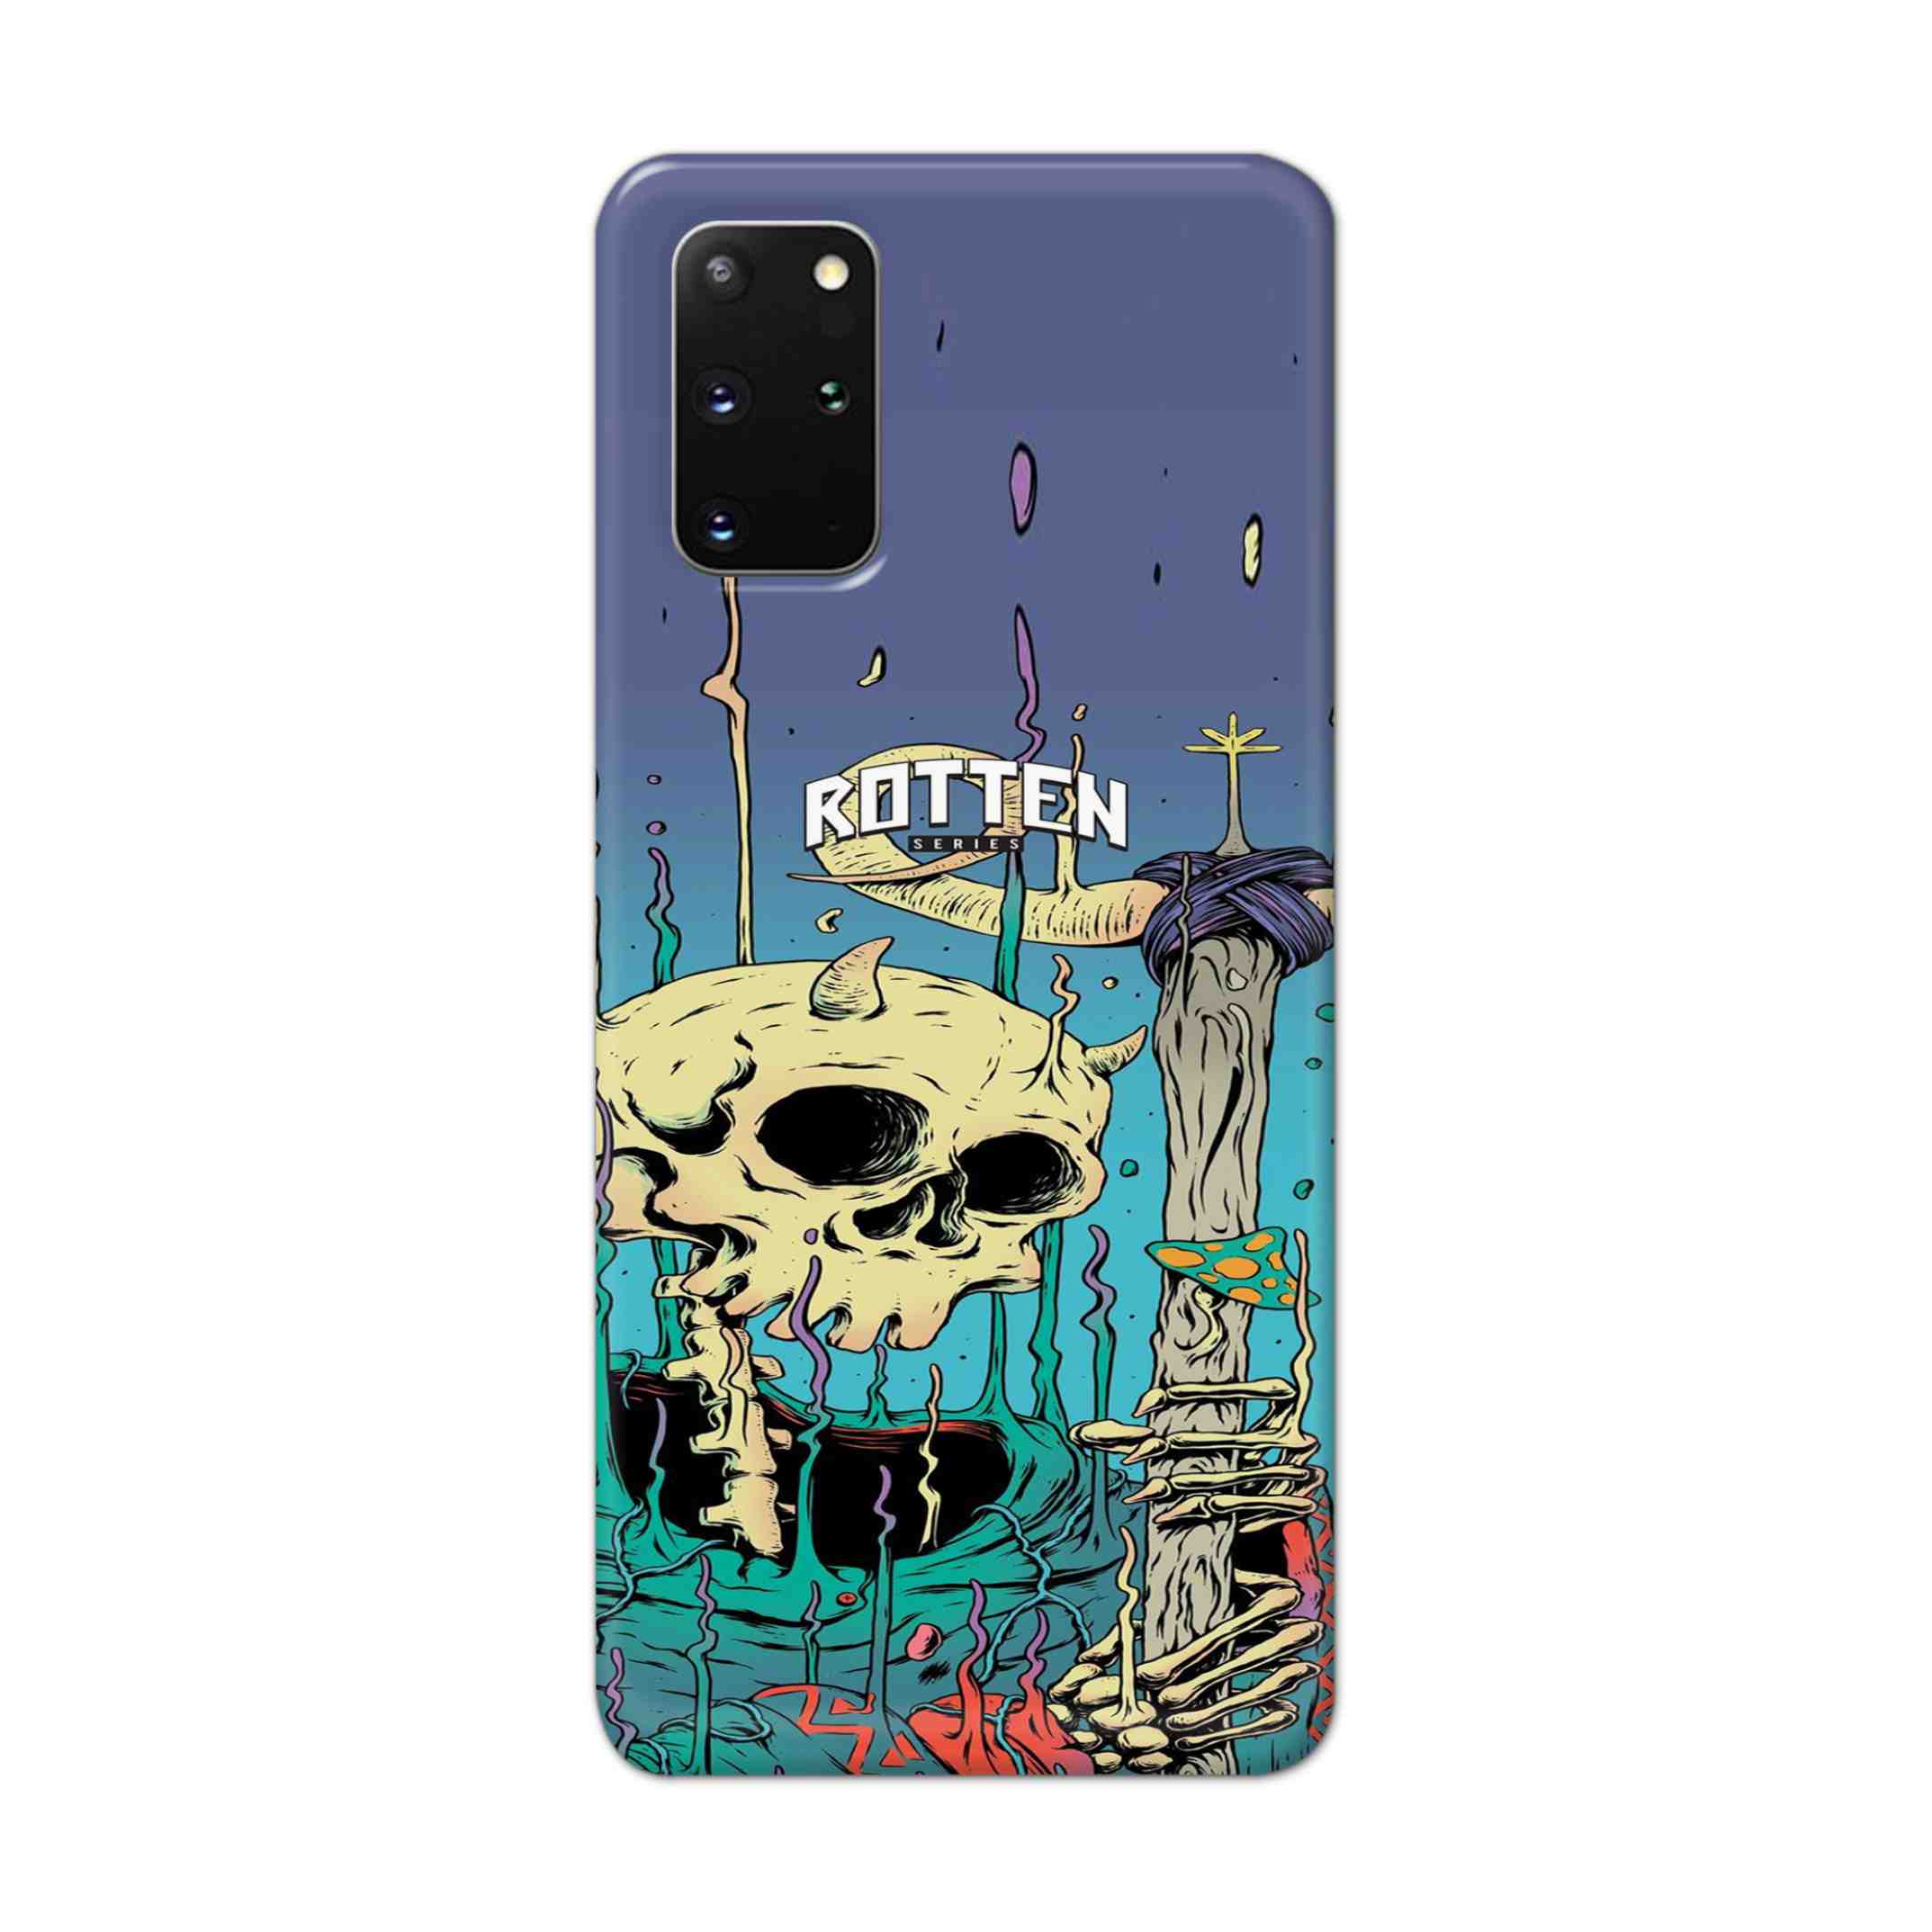 Buy Skull Hard Back Mobile Phone Case Cover For Samsung Galaxy S20 Plus Online